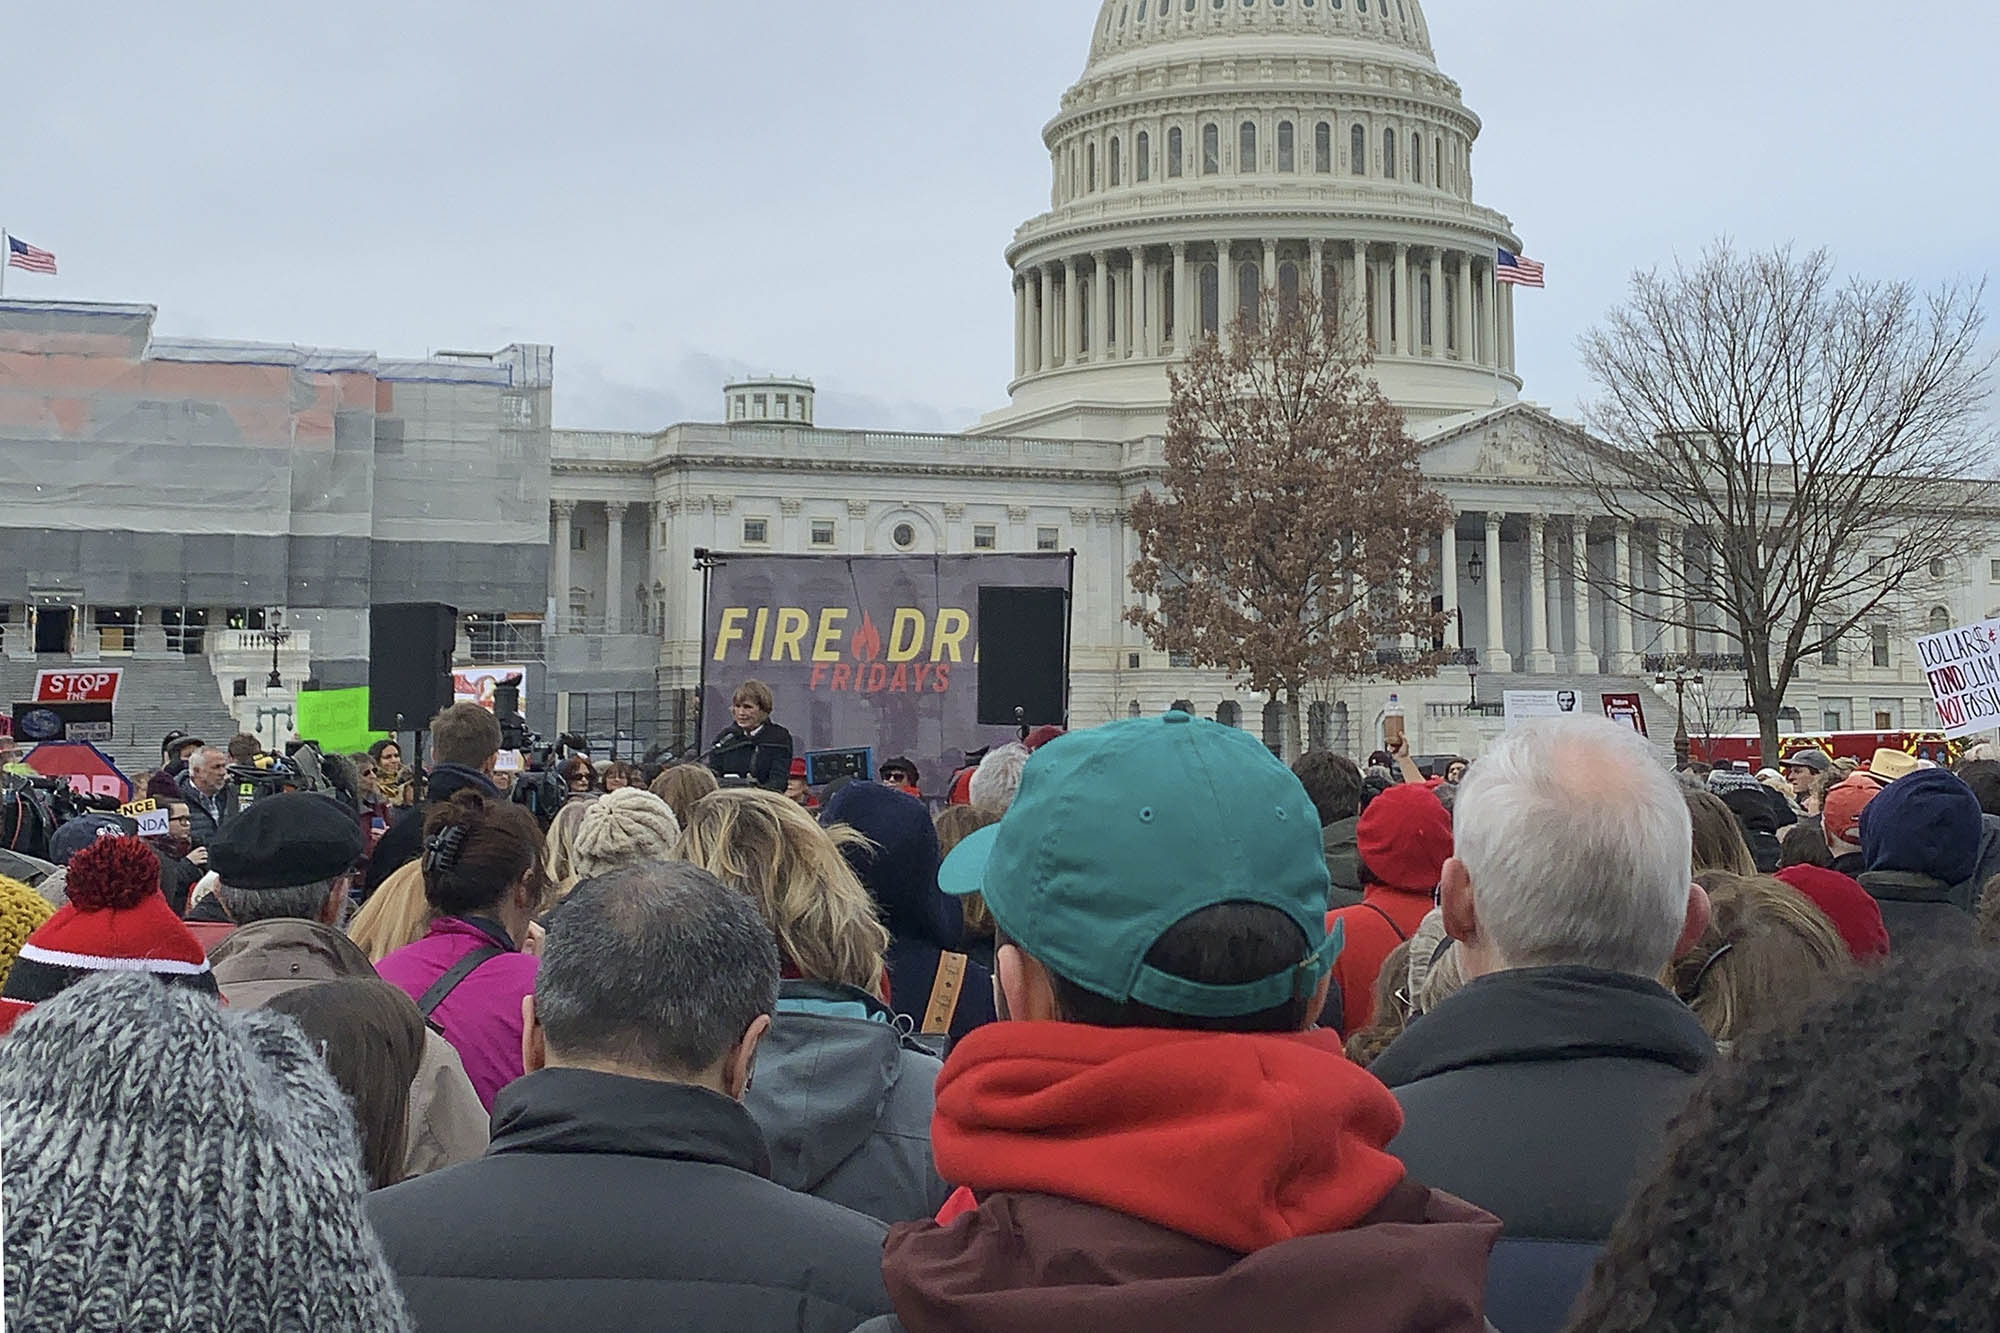 Group of people gathered at the US Capital Building